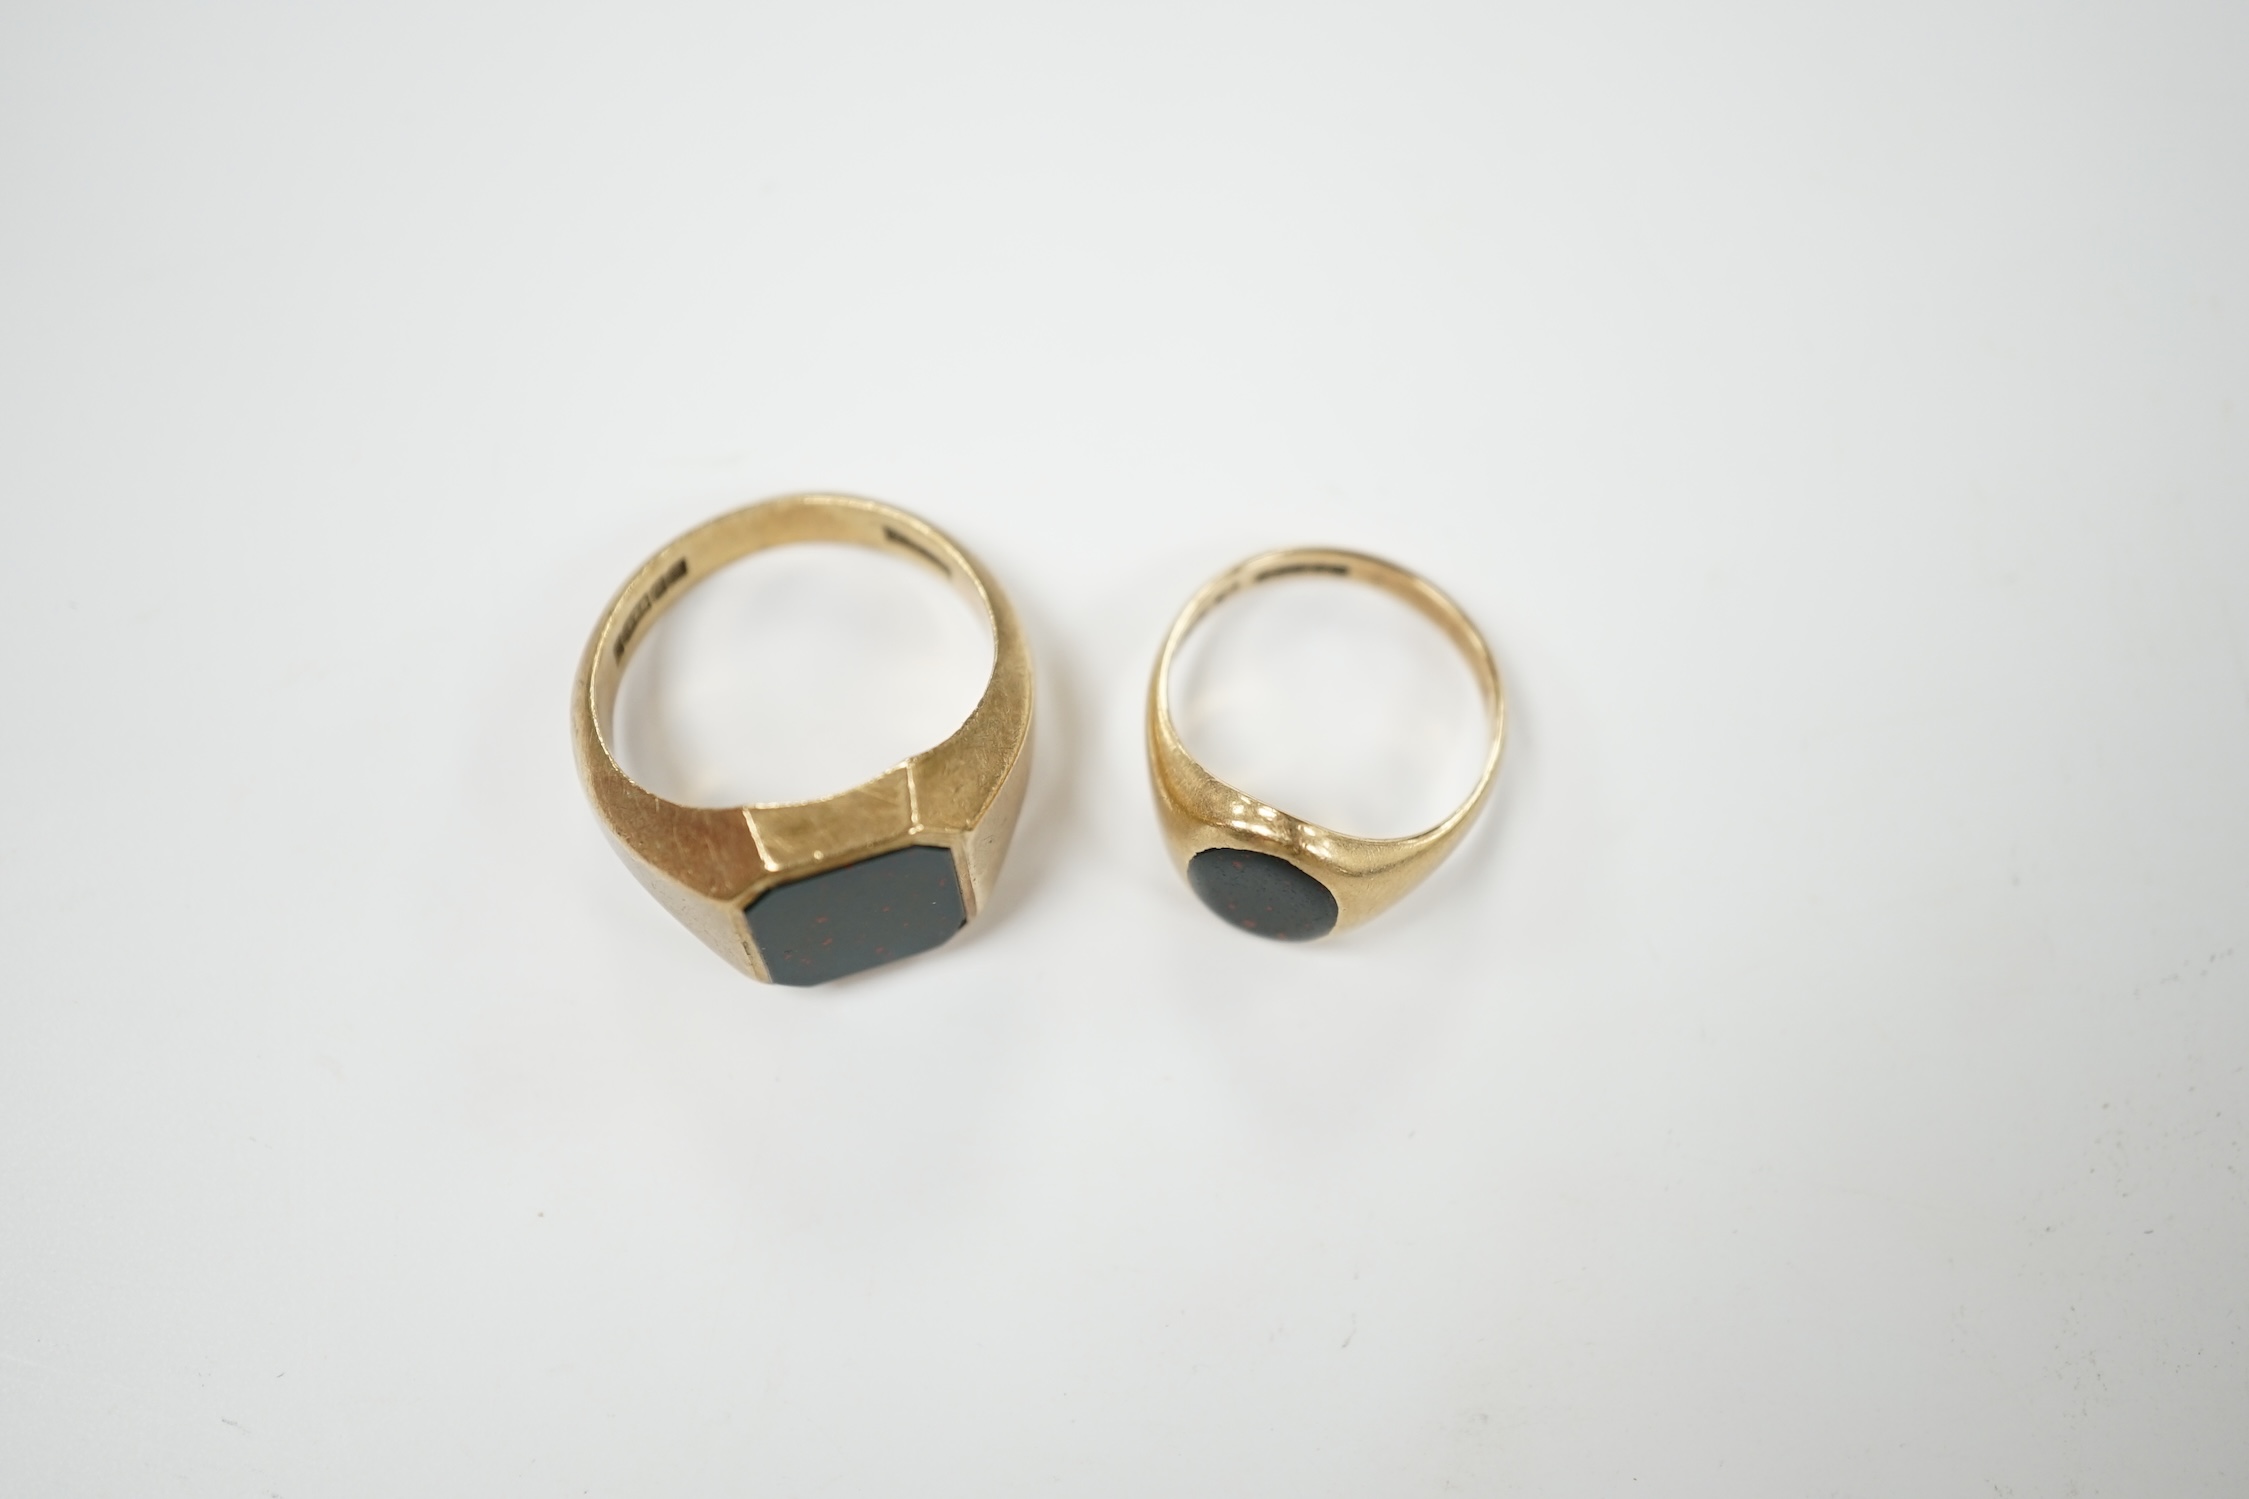 Two 9ct gold and bloodstone set signet rings, largest size Q, gross weight 11.5 grams. Condition - poor to fair